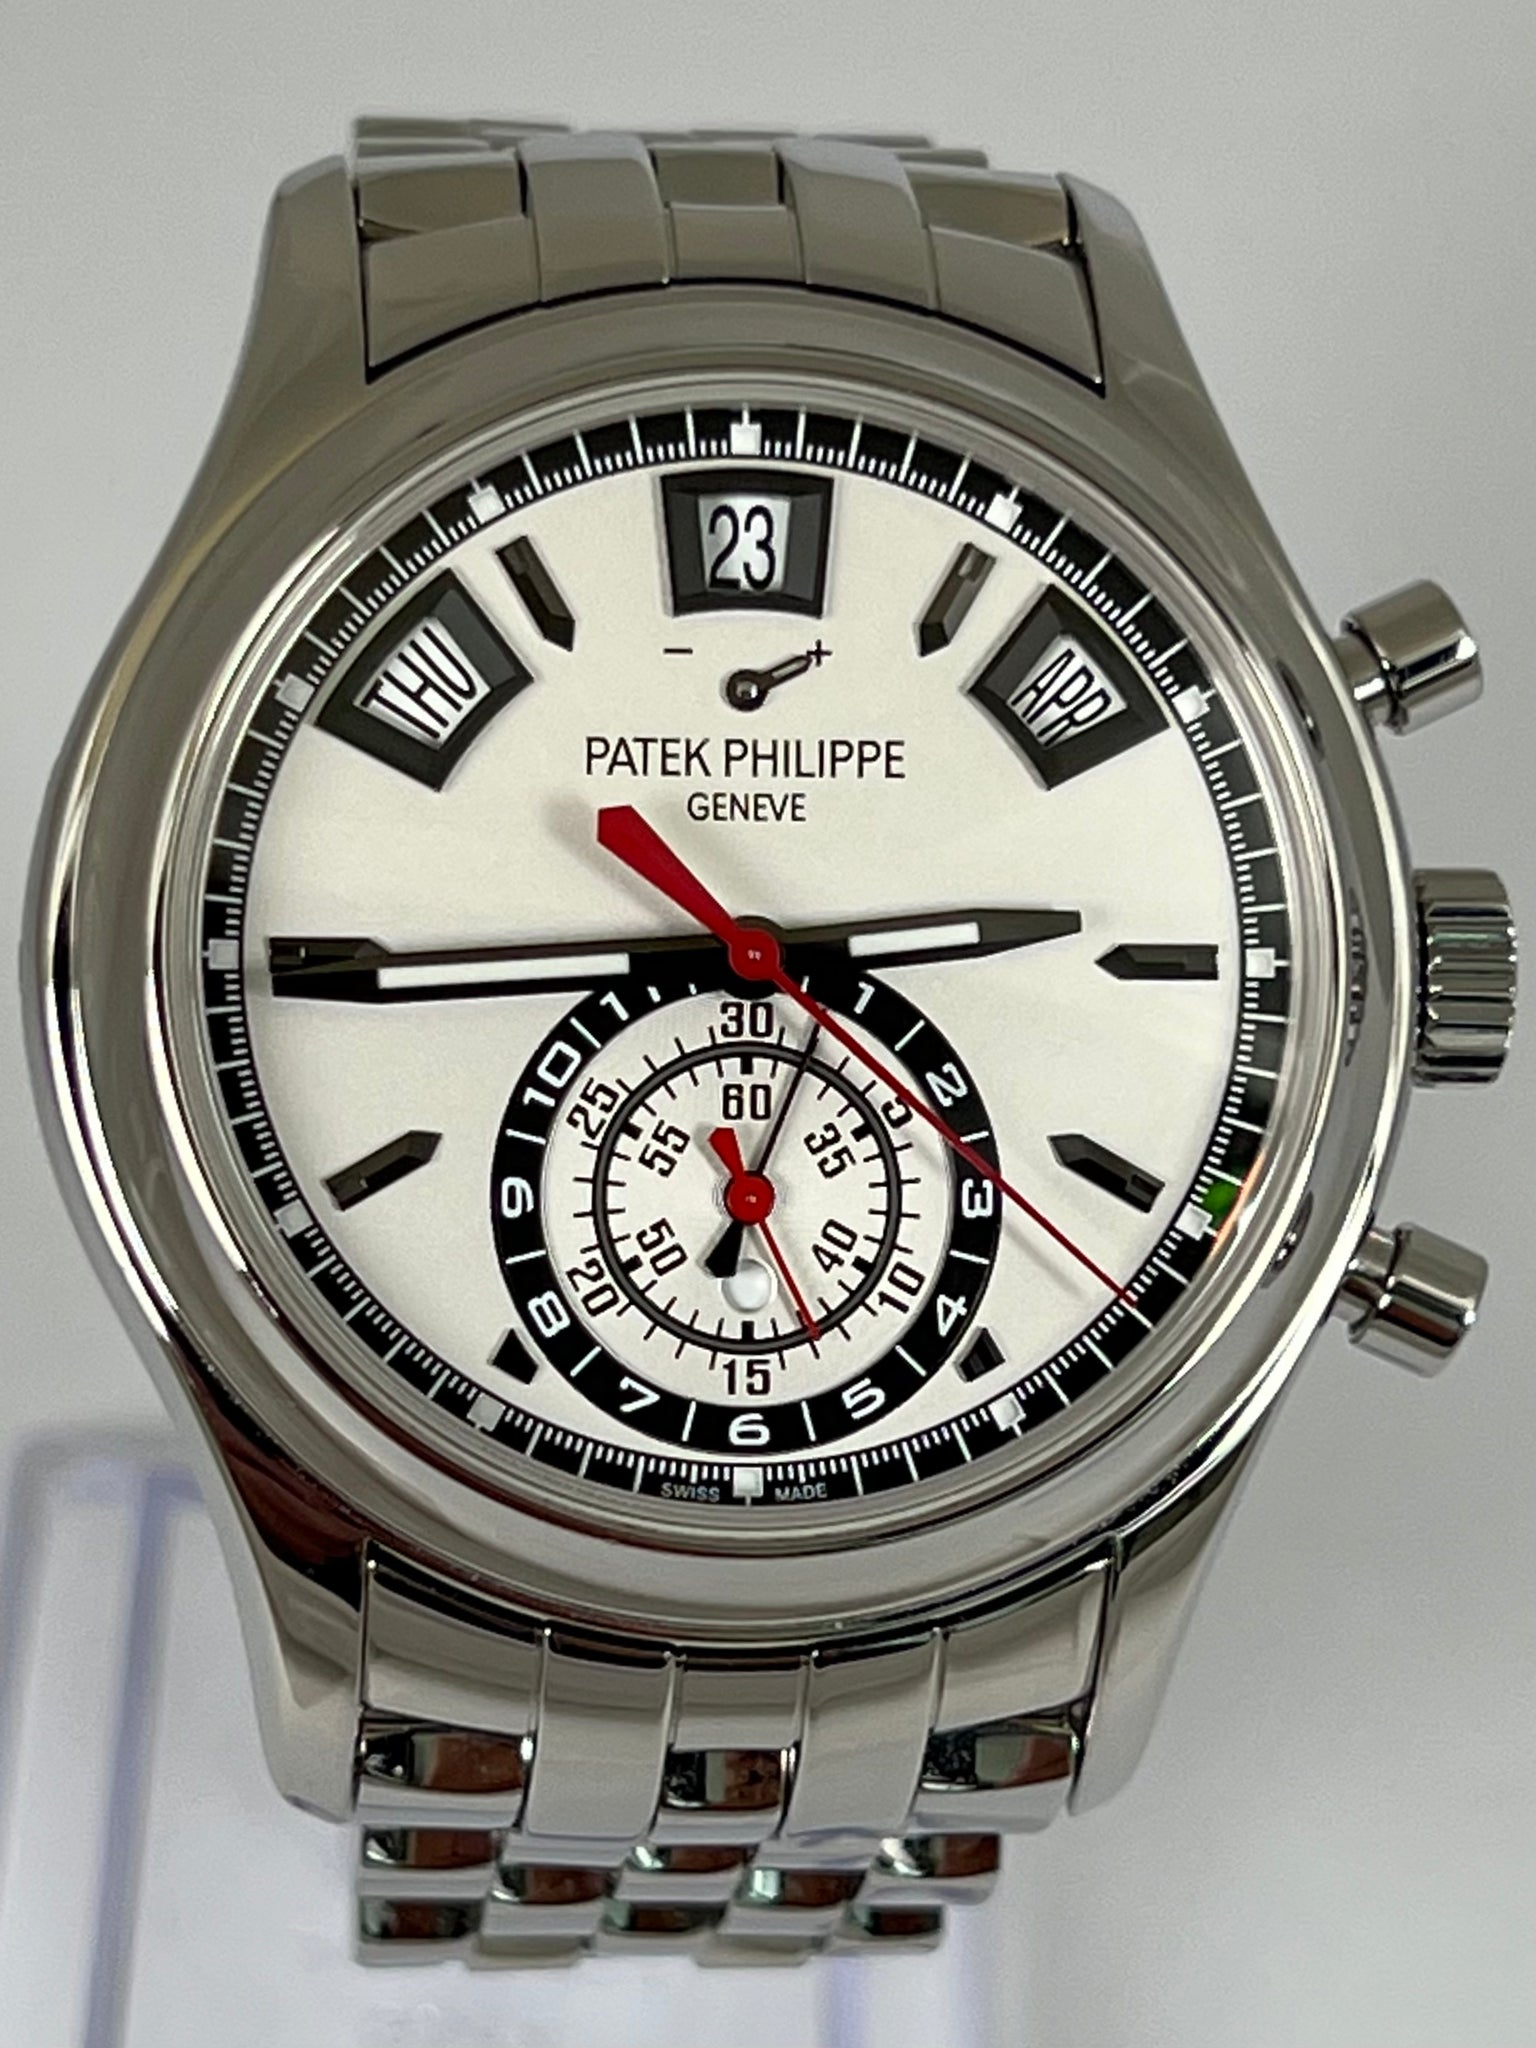 PATEK PHILIPPE FLYBACK CHRONOGRAPH ANNUAL CALENDAR WHITE DIAL 5960/1A